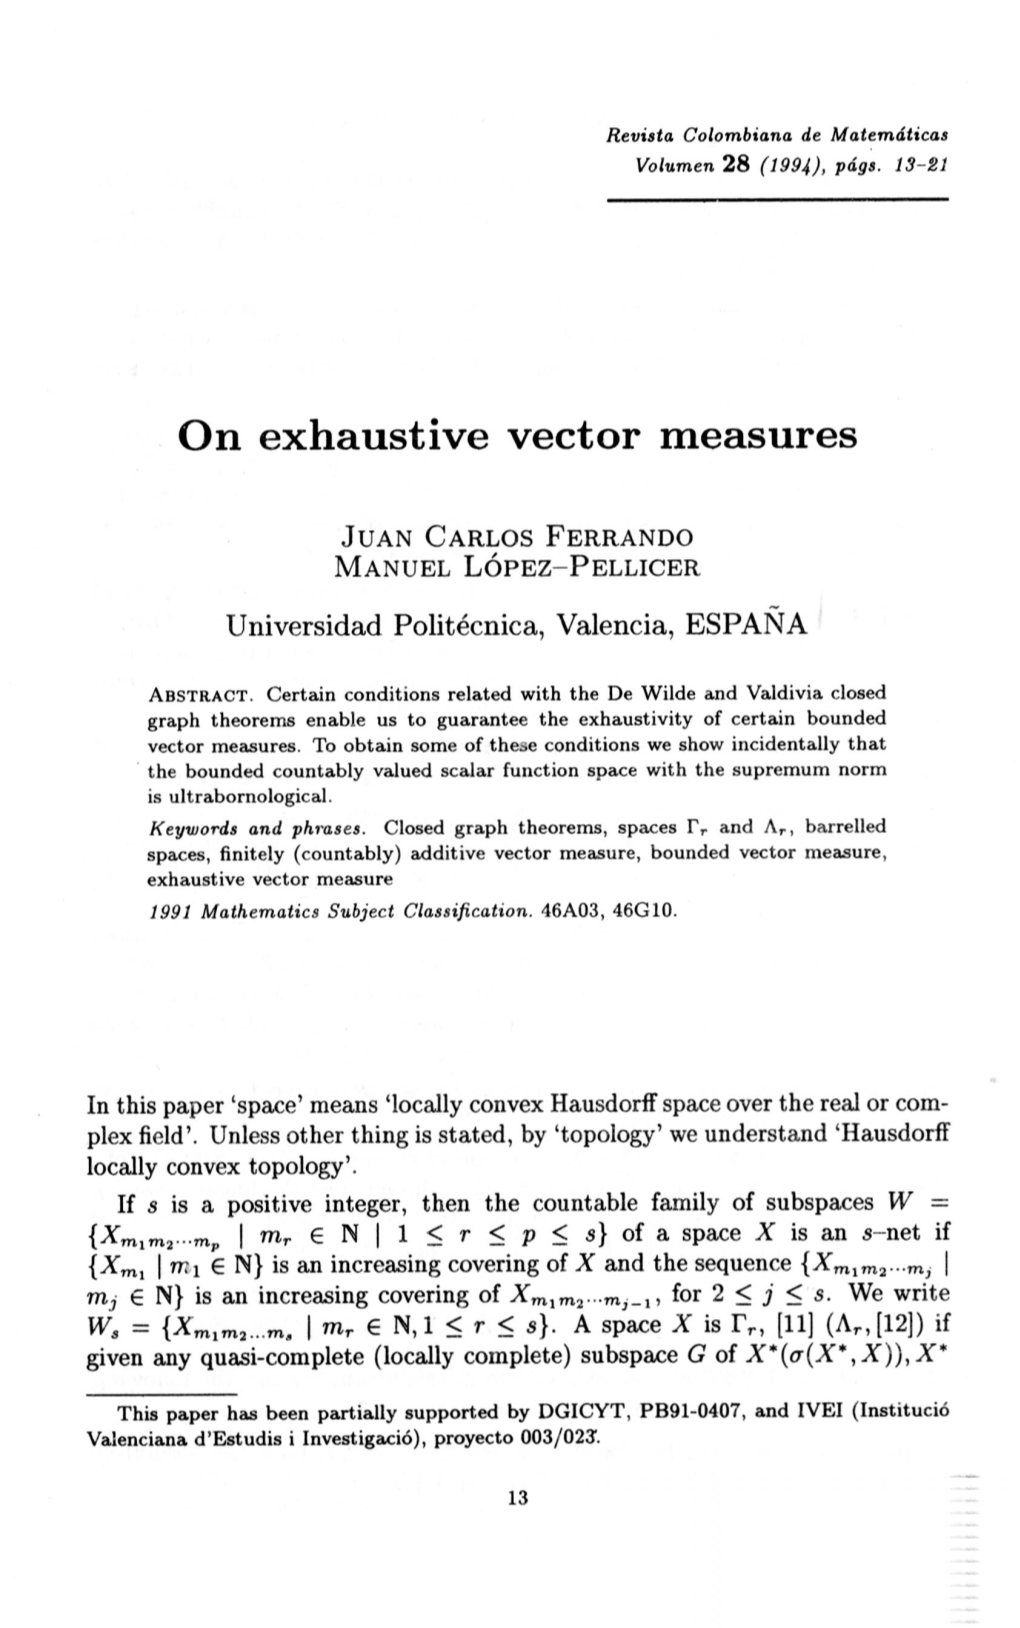 On Exhaustive Vector Measures